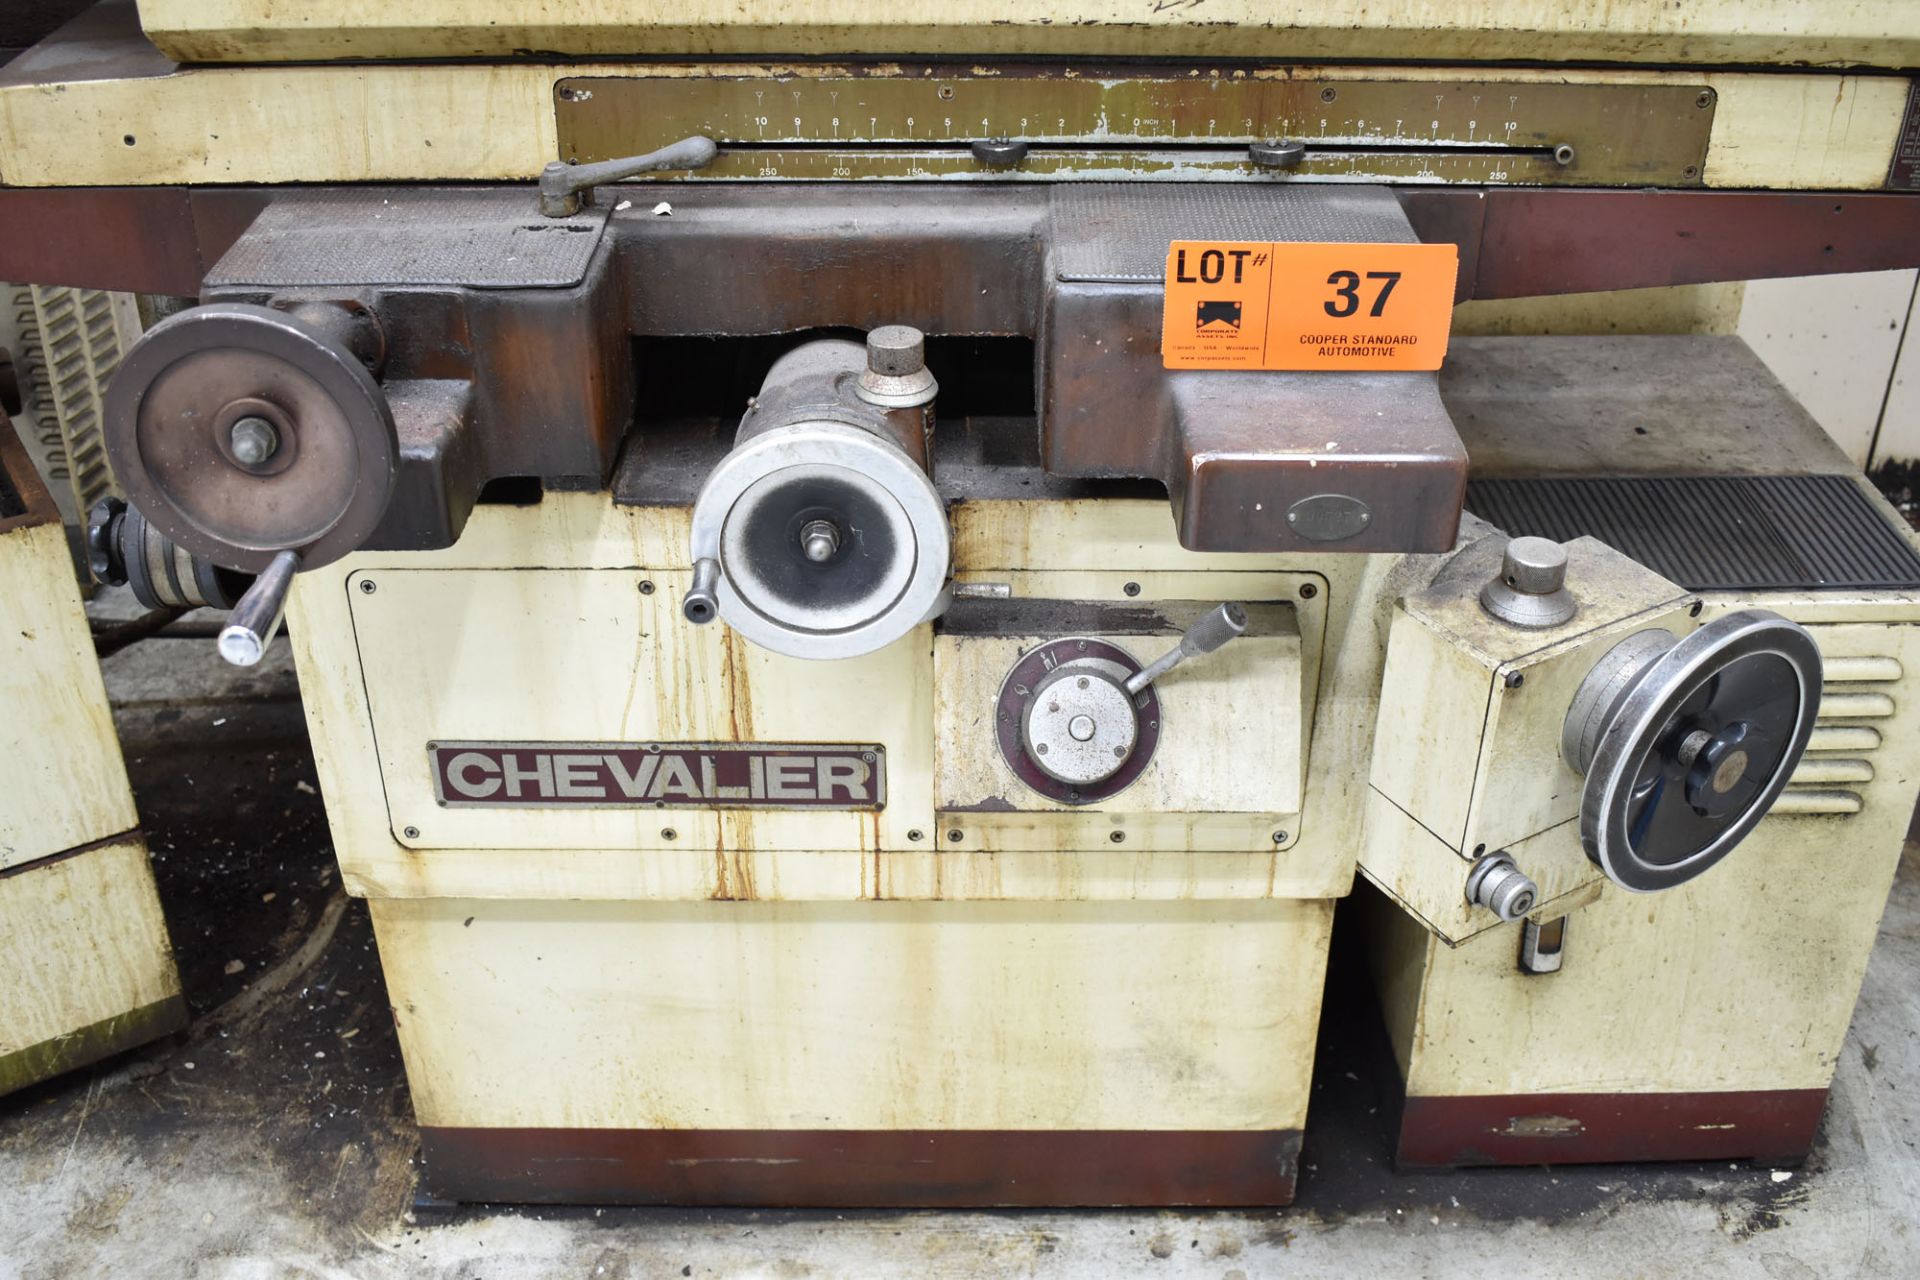 CHEVALIER FSG-818AD HYDRAULIC SURFACE GRINDER WITH 18"X8" MAGNETIC CHUCK, INCREMENTAL DOWNFEED, - Image 4 of 6